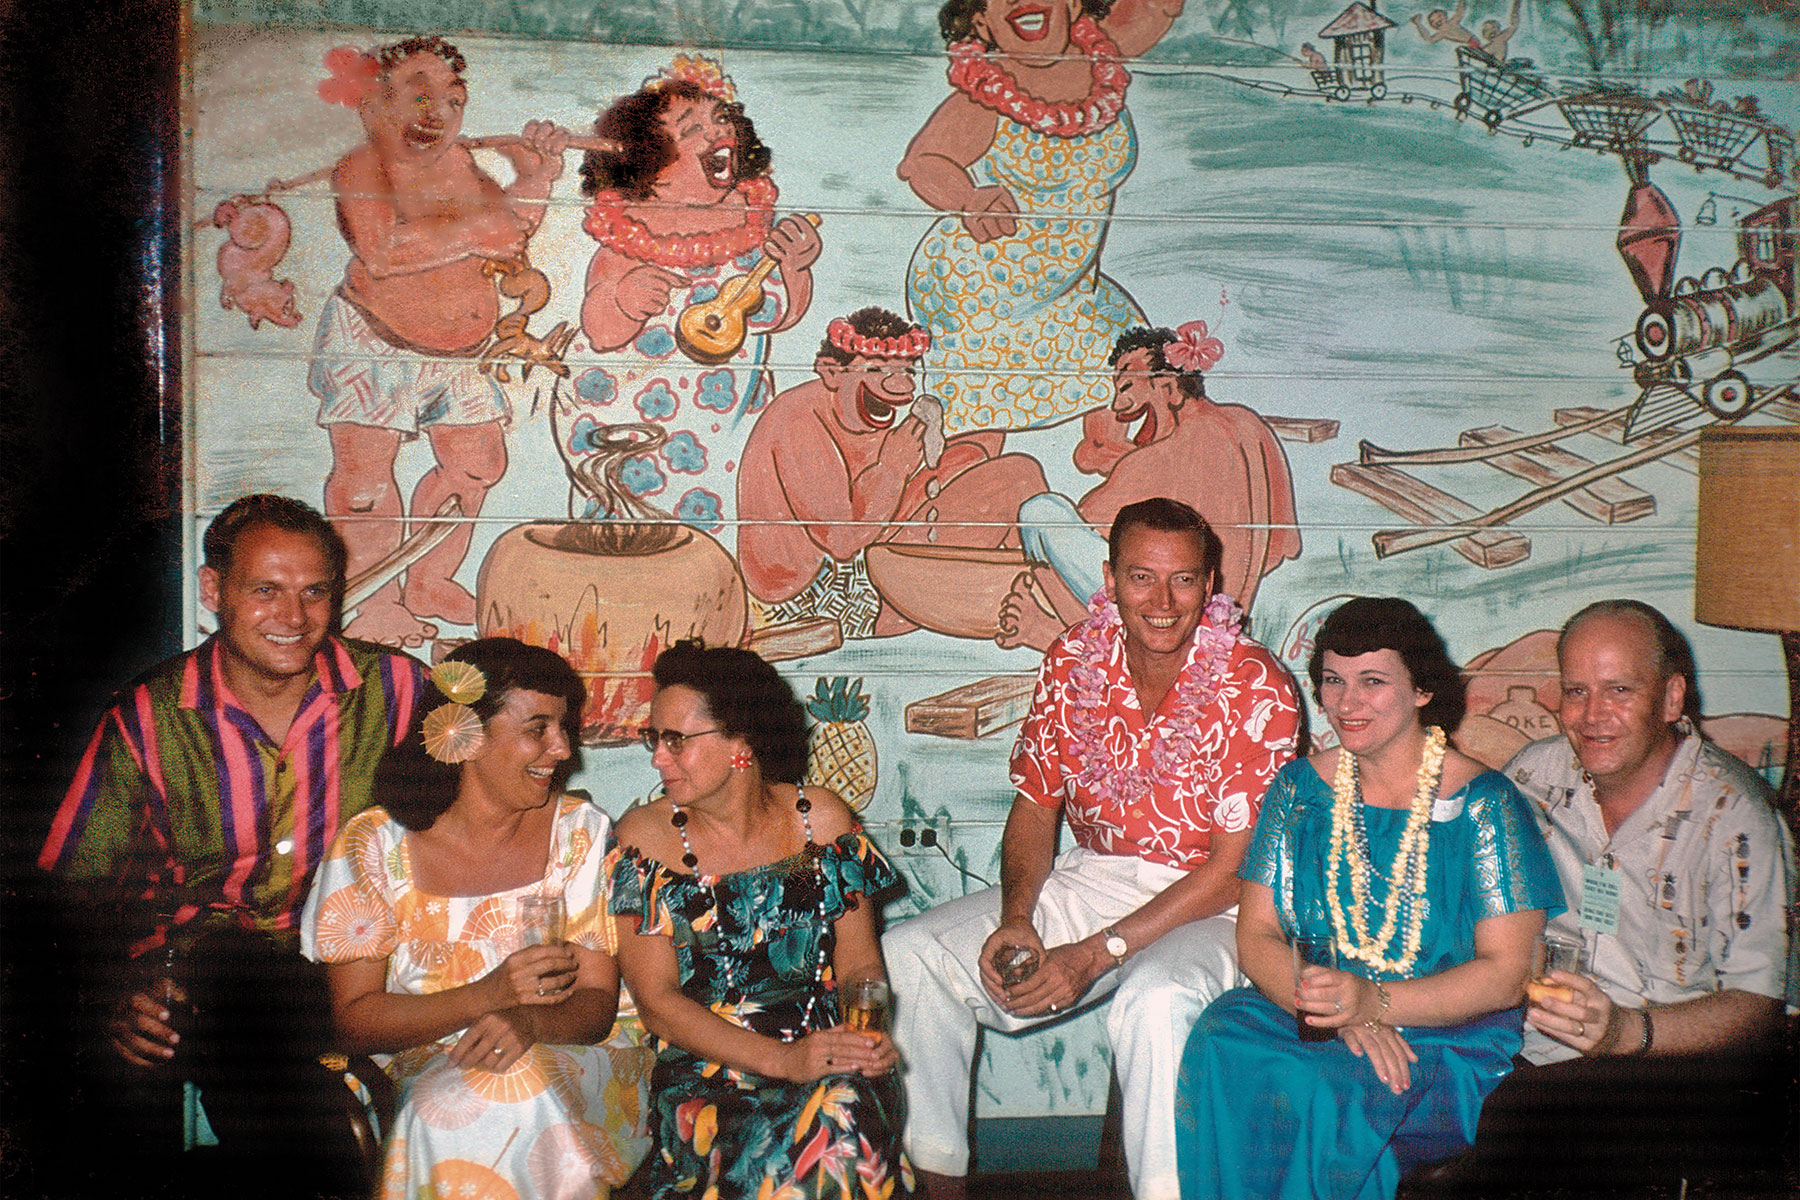 retro photo of vacationers in a tiki setting